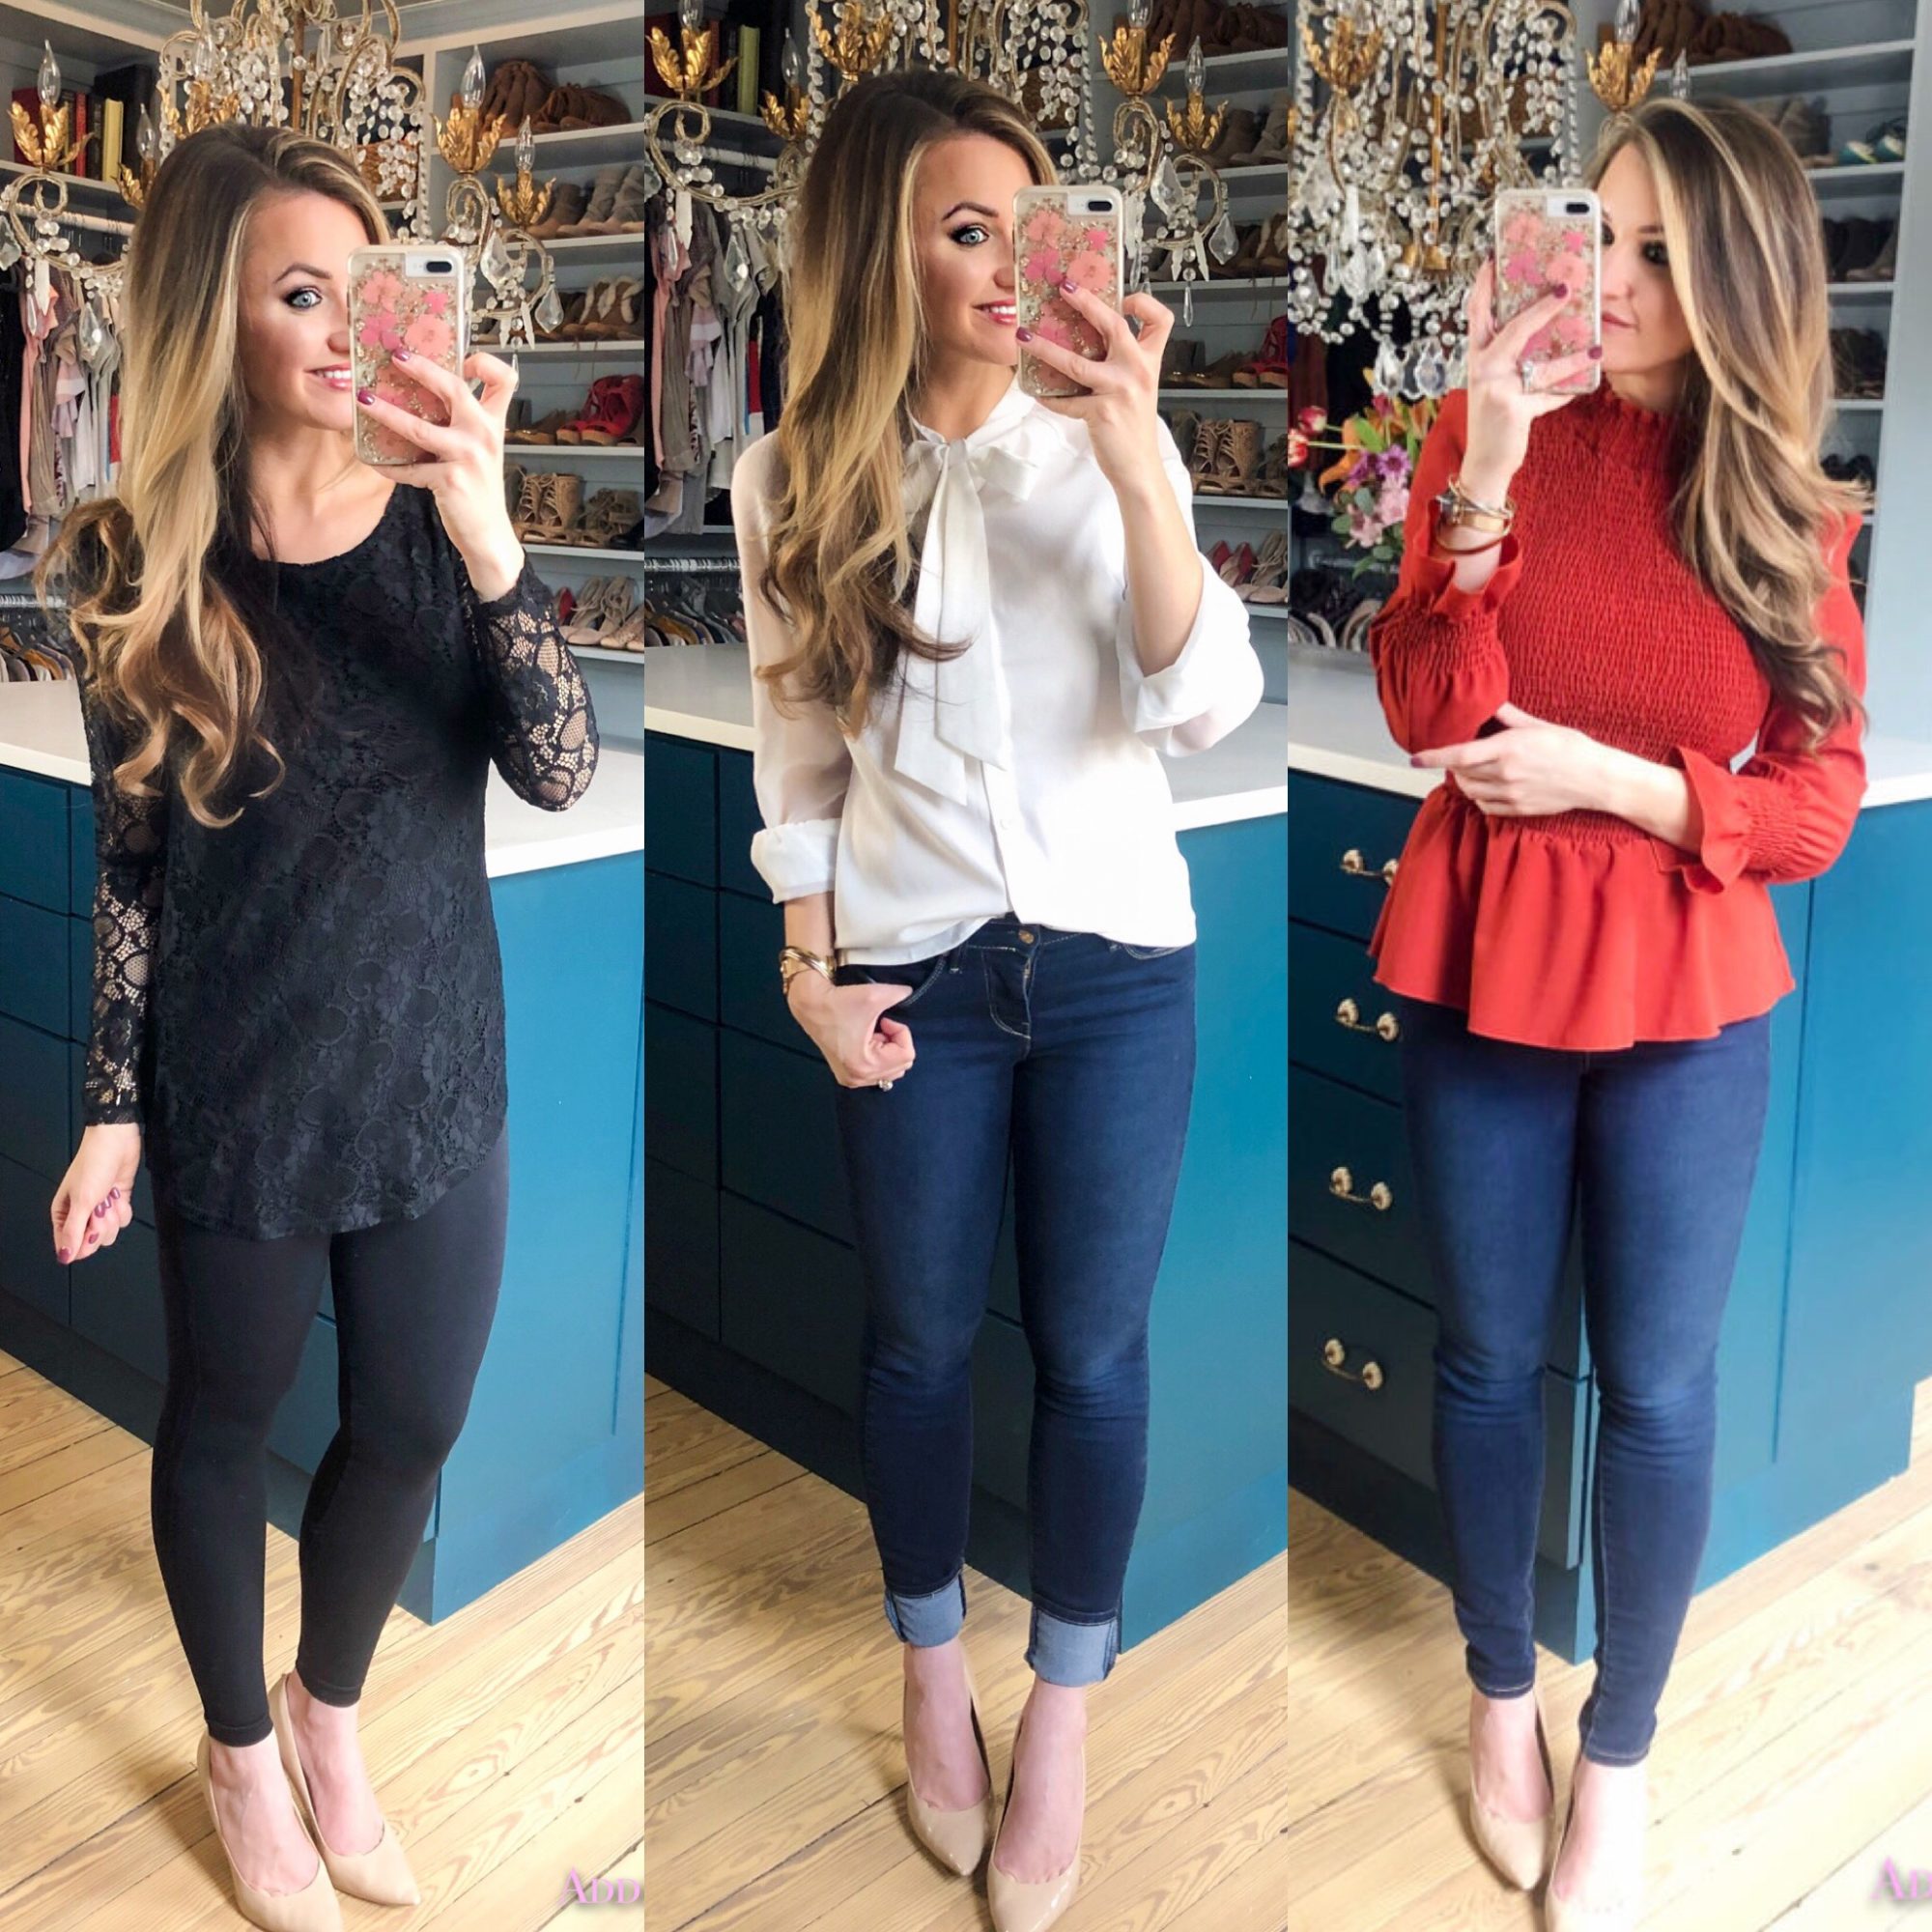 SEVEN Dressy & Work Outfit Tops for Women all UNDER $28! - Addison's  Wonderland